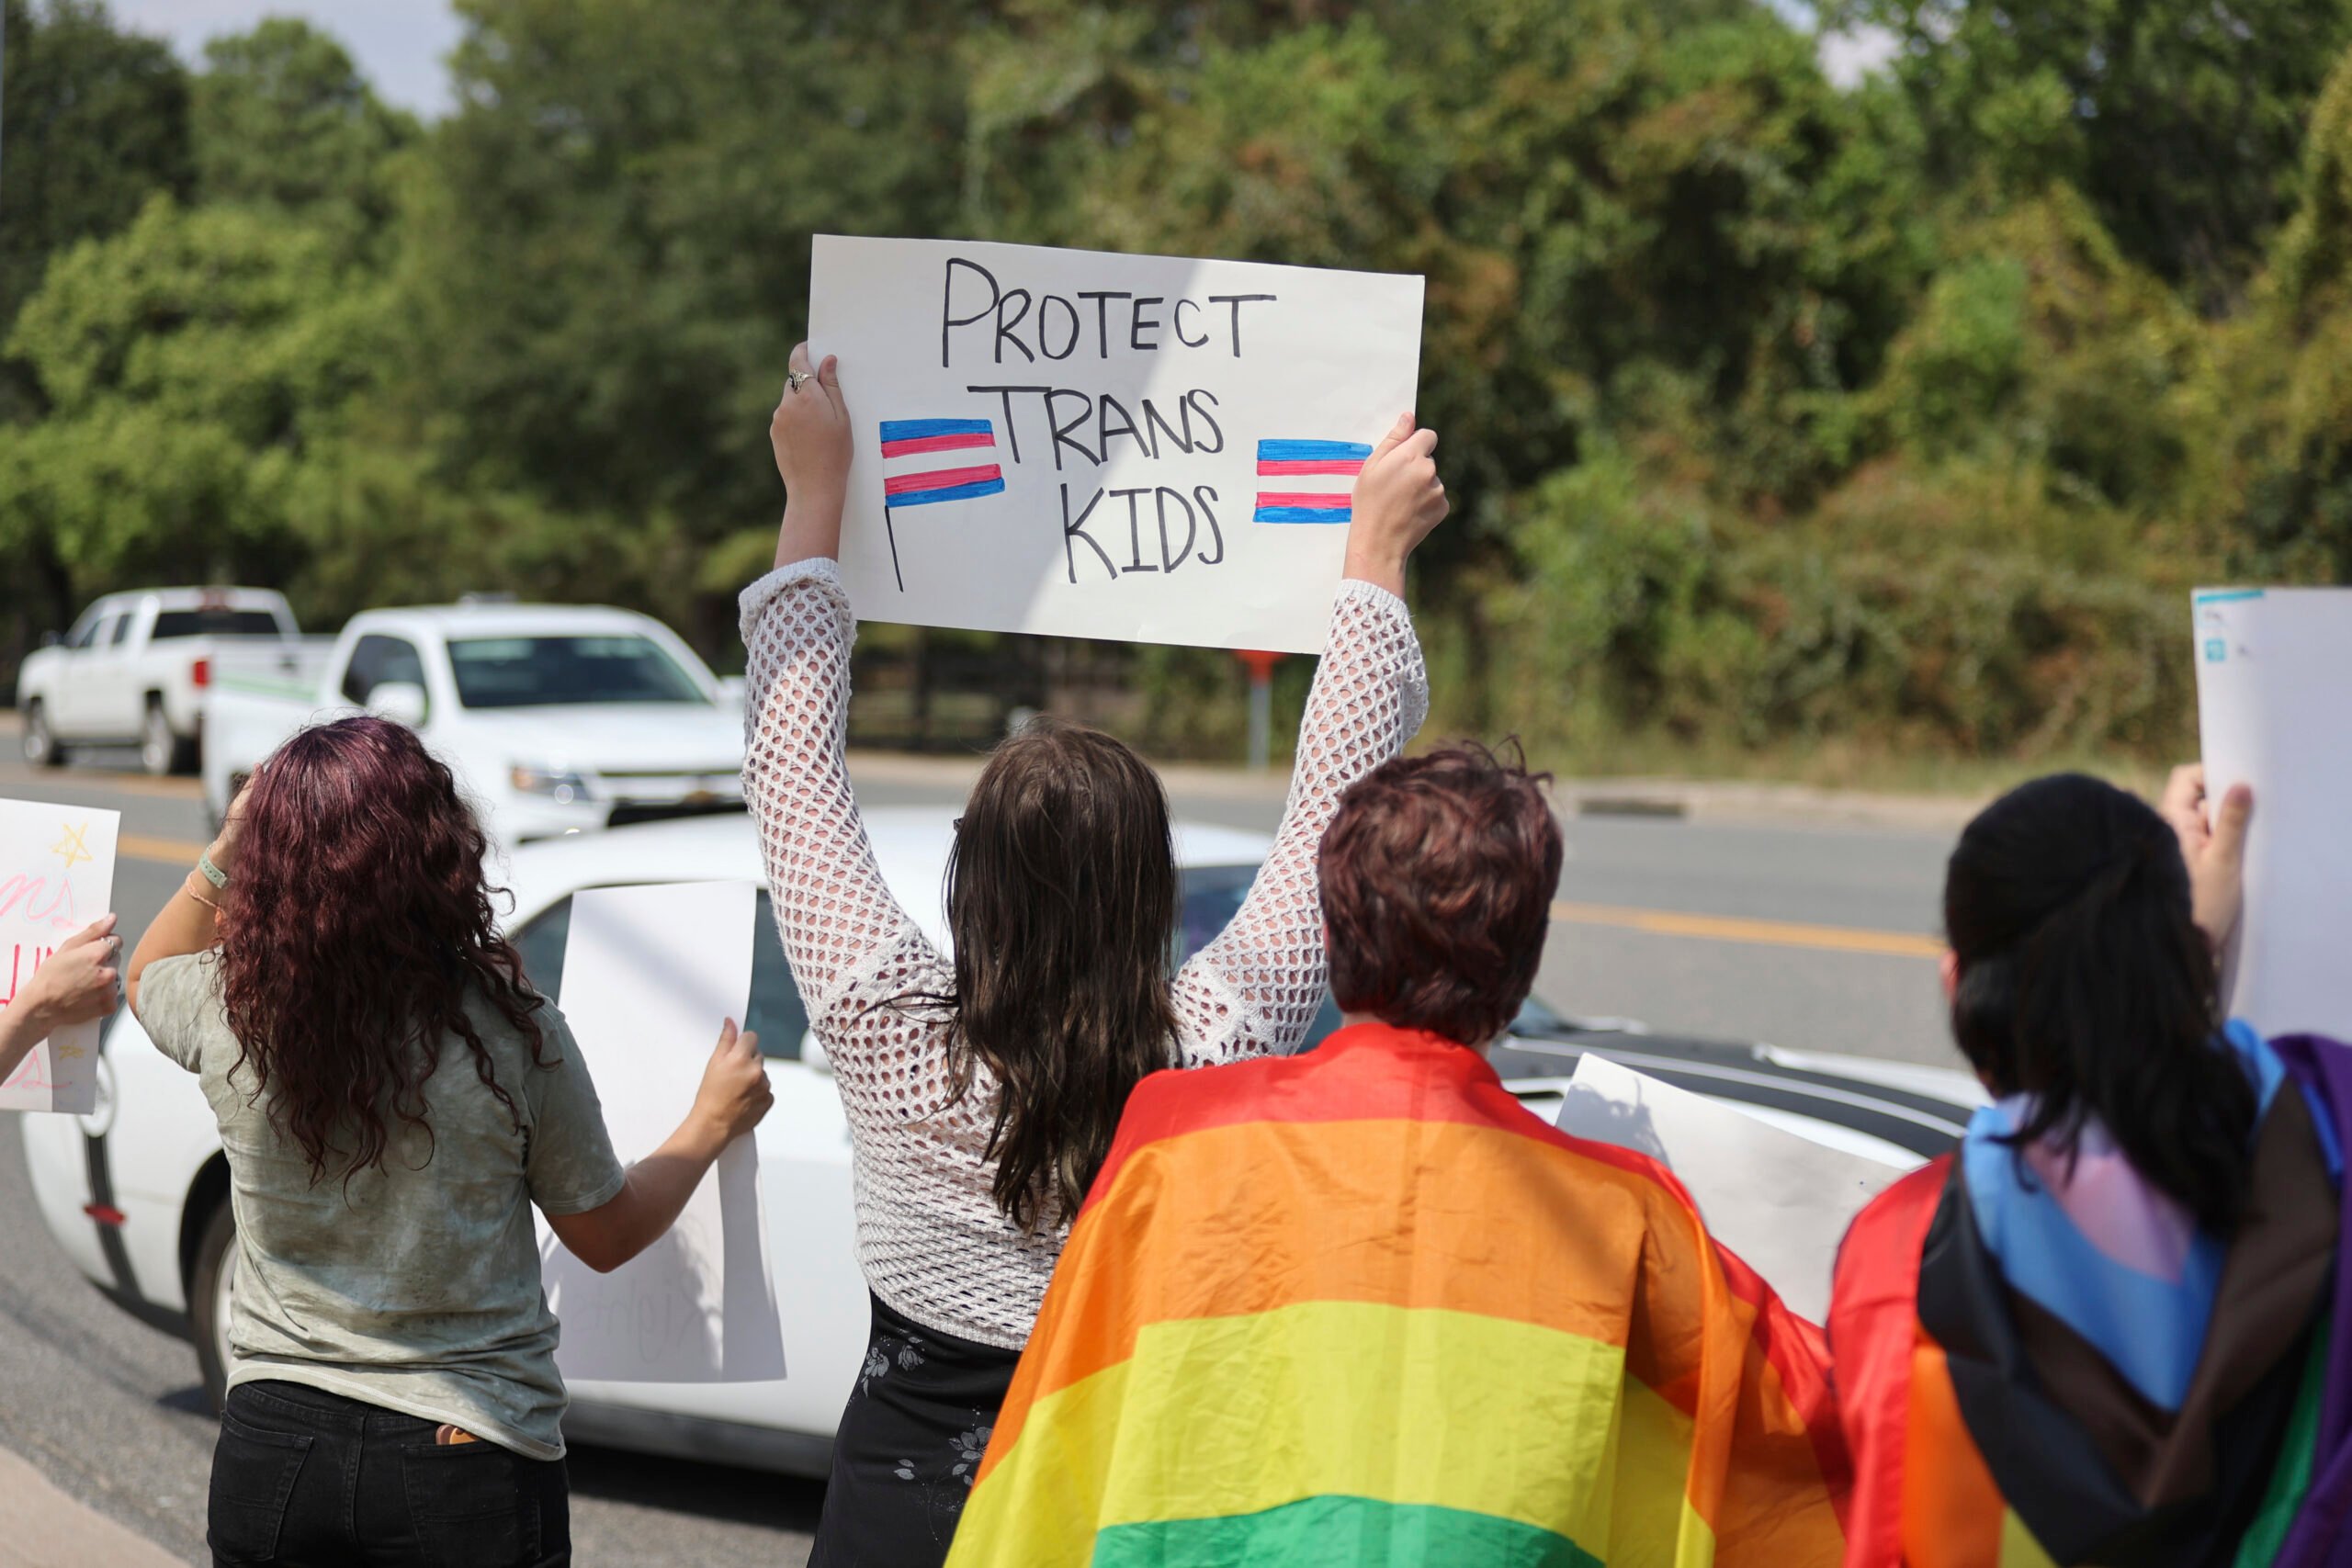 Protesters outside the Katy Independent School District's central office on August 31